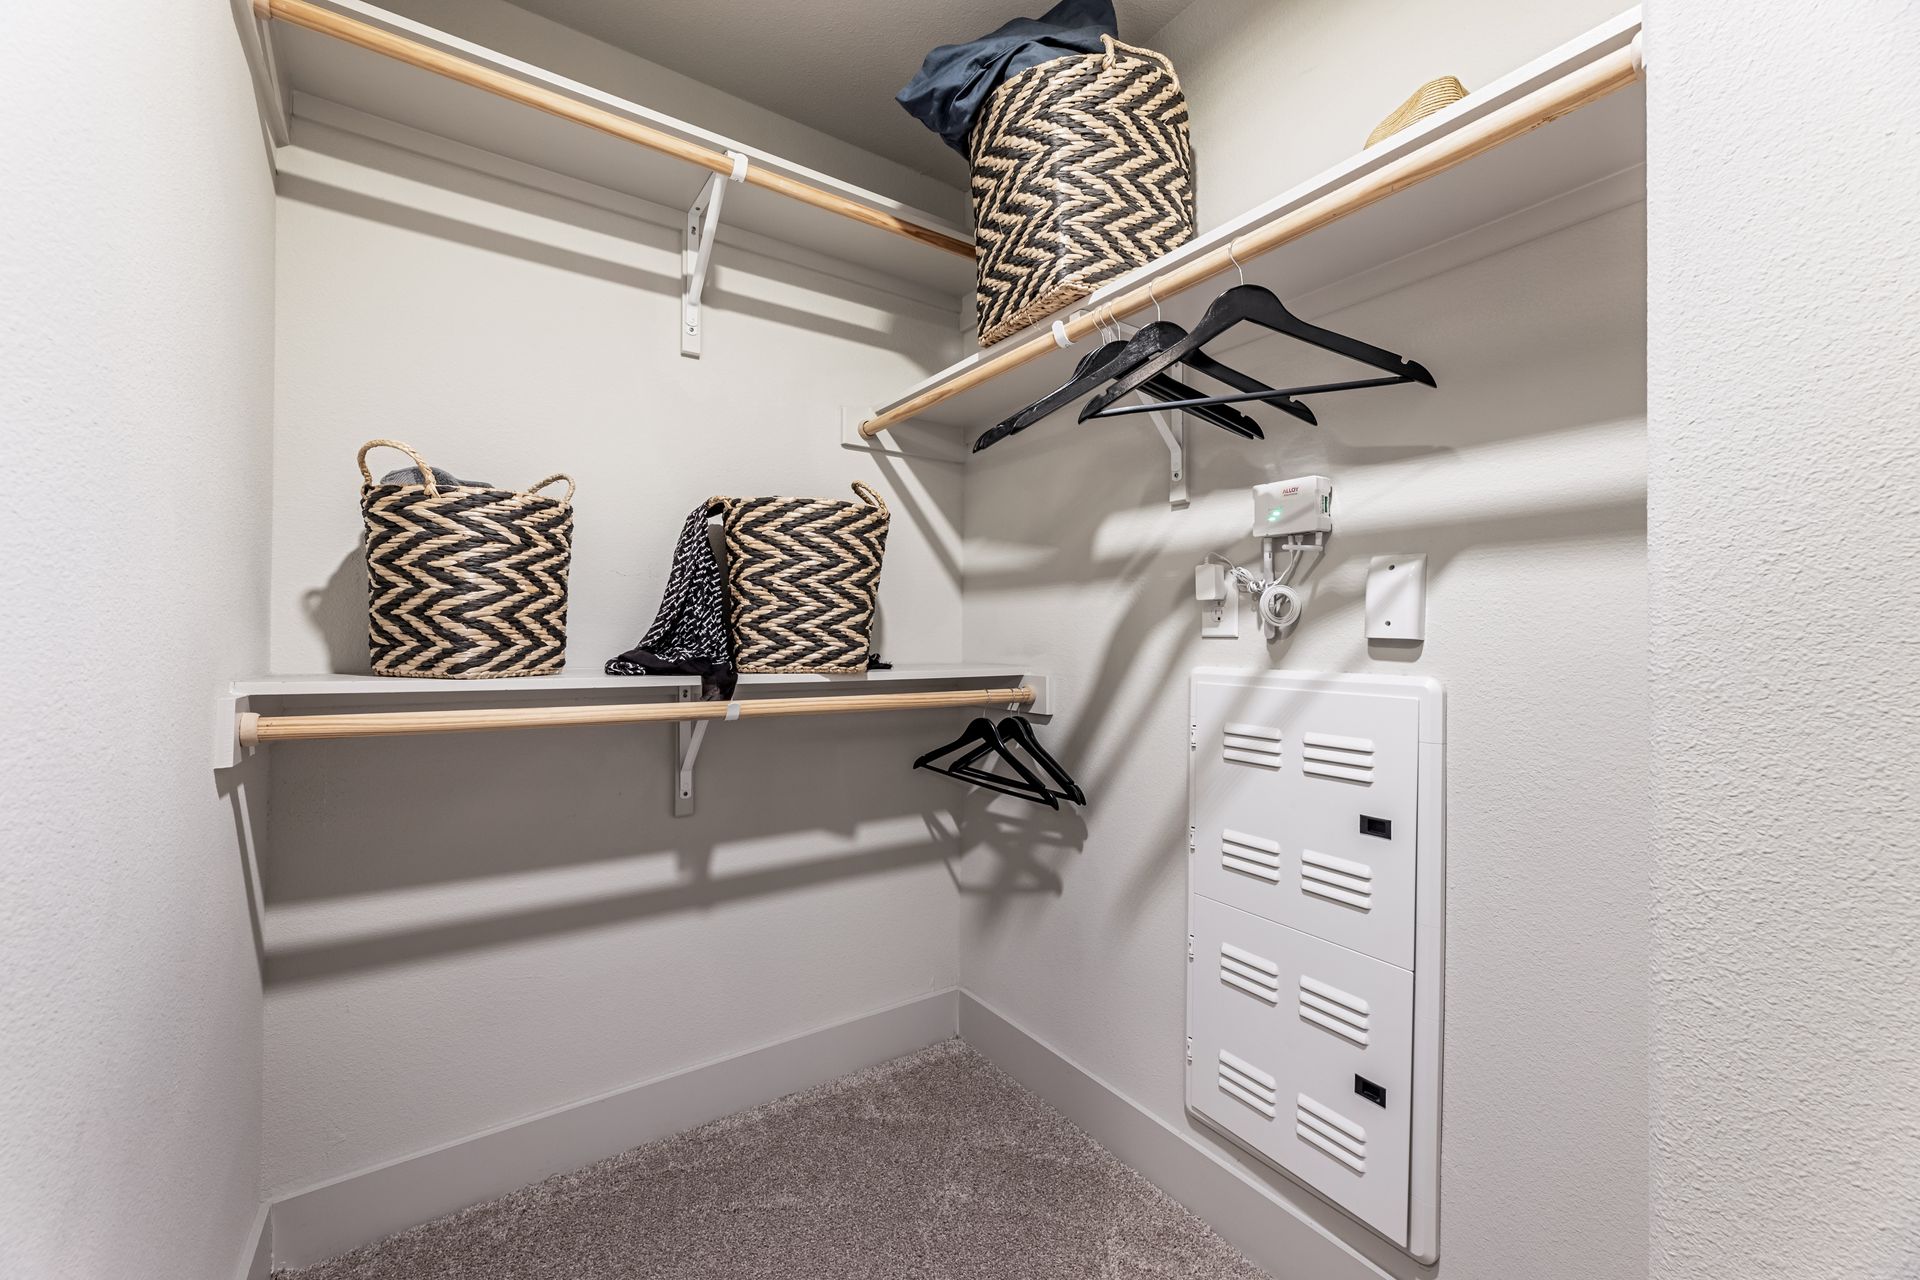 A walk-in closet with shelves, baskets, and clothes hangers at Parkside at Craig Ranch.